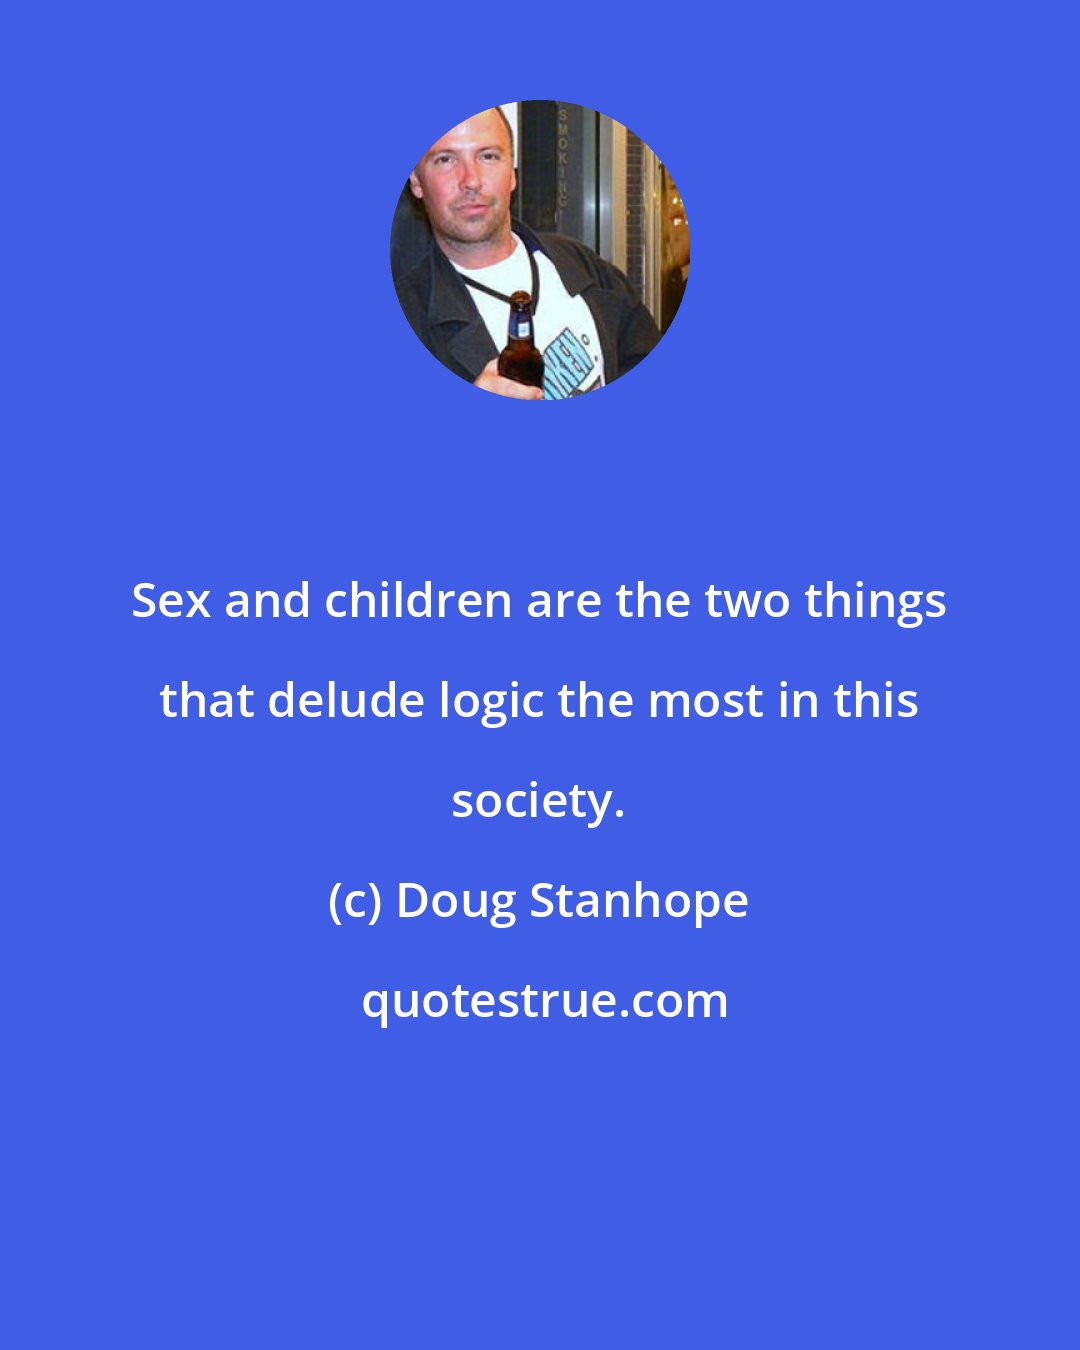 Doug Stanhope: Sex and children are the two things that delude logic the most in this society.